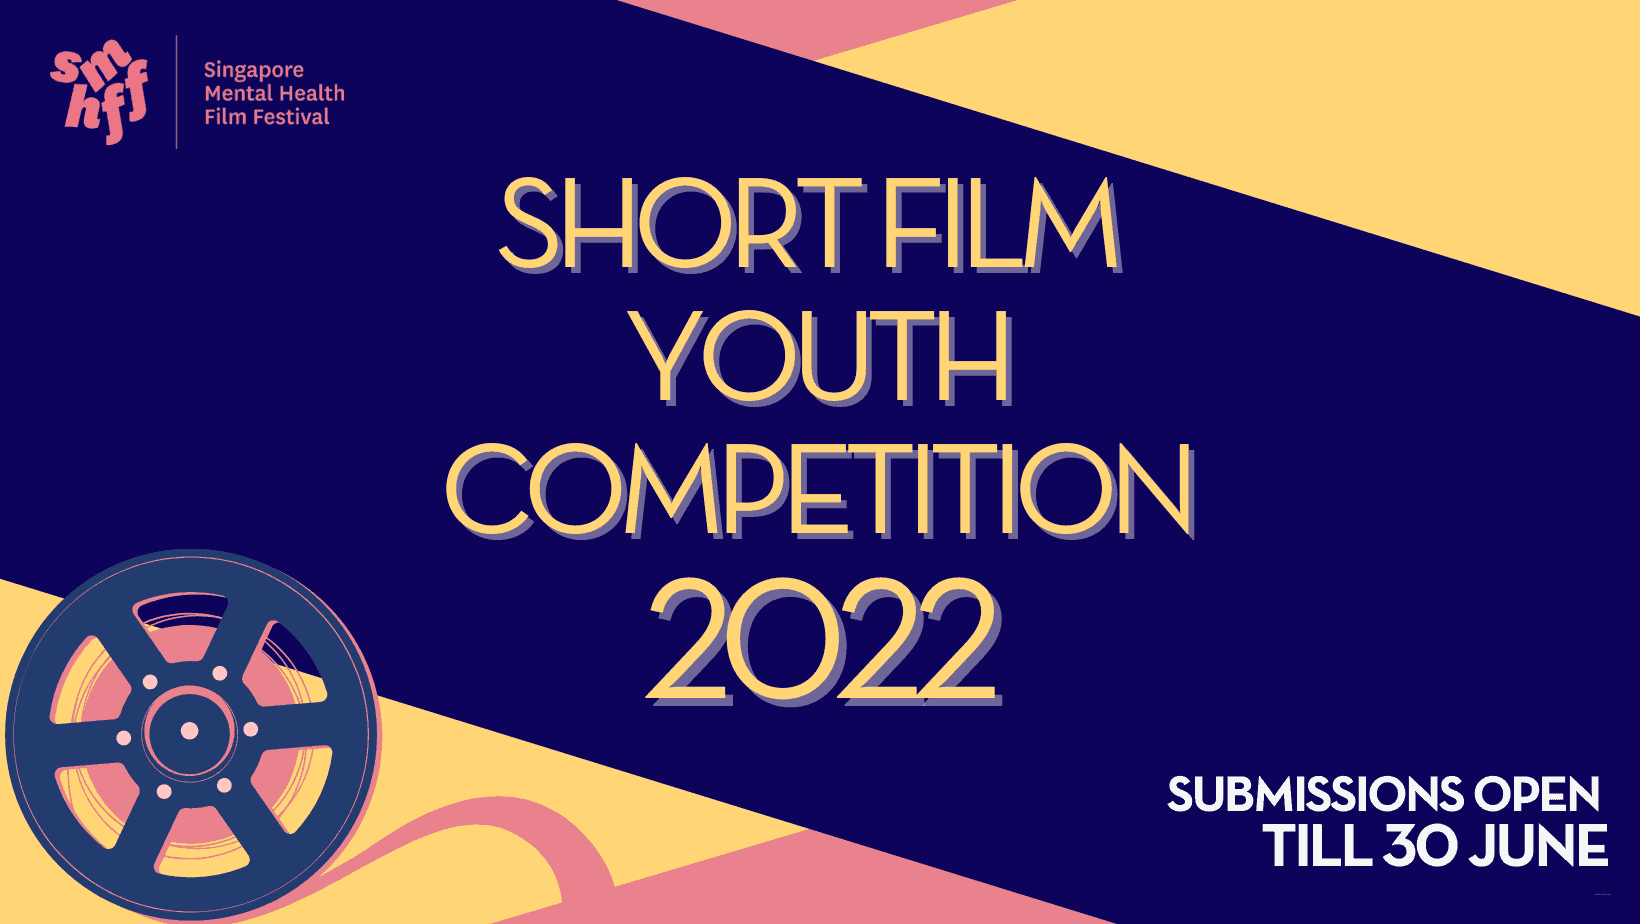 Short film youth competition 2022